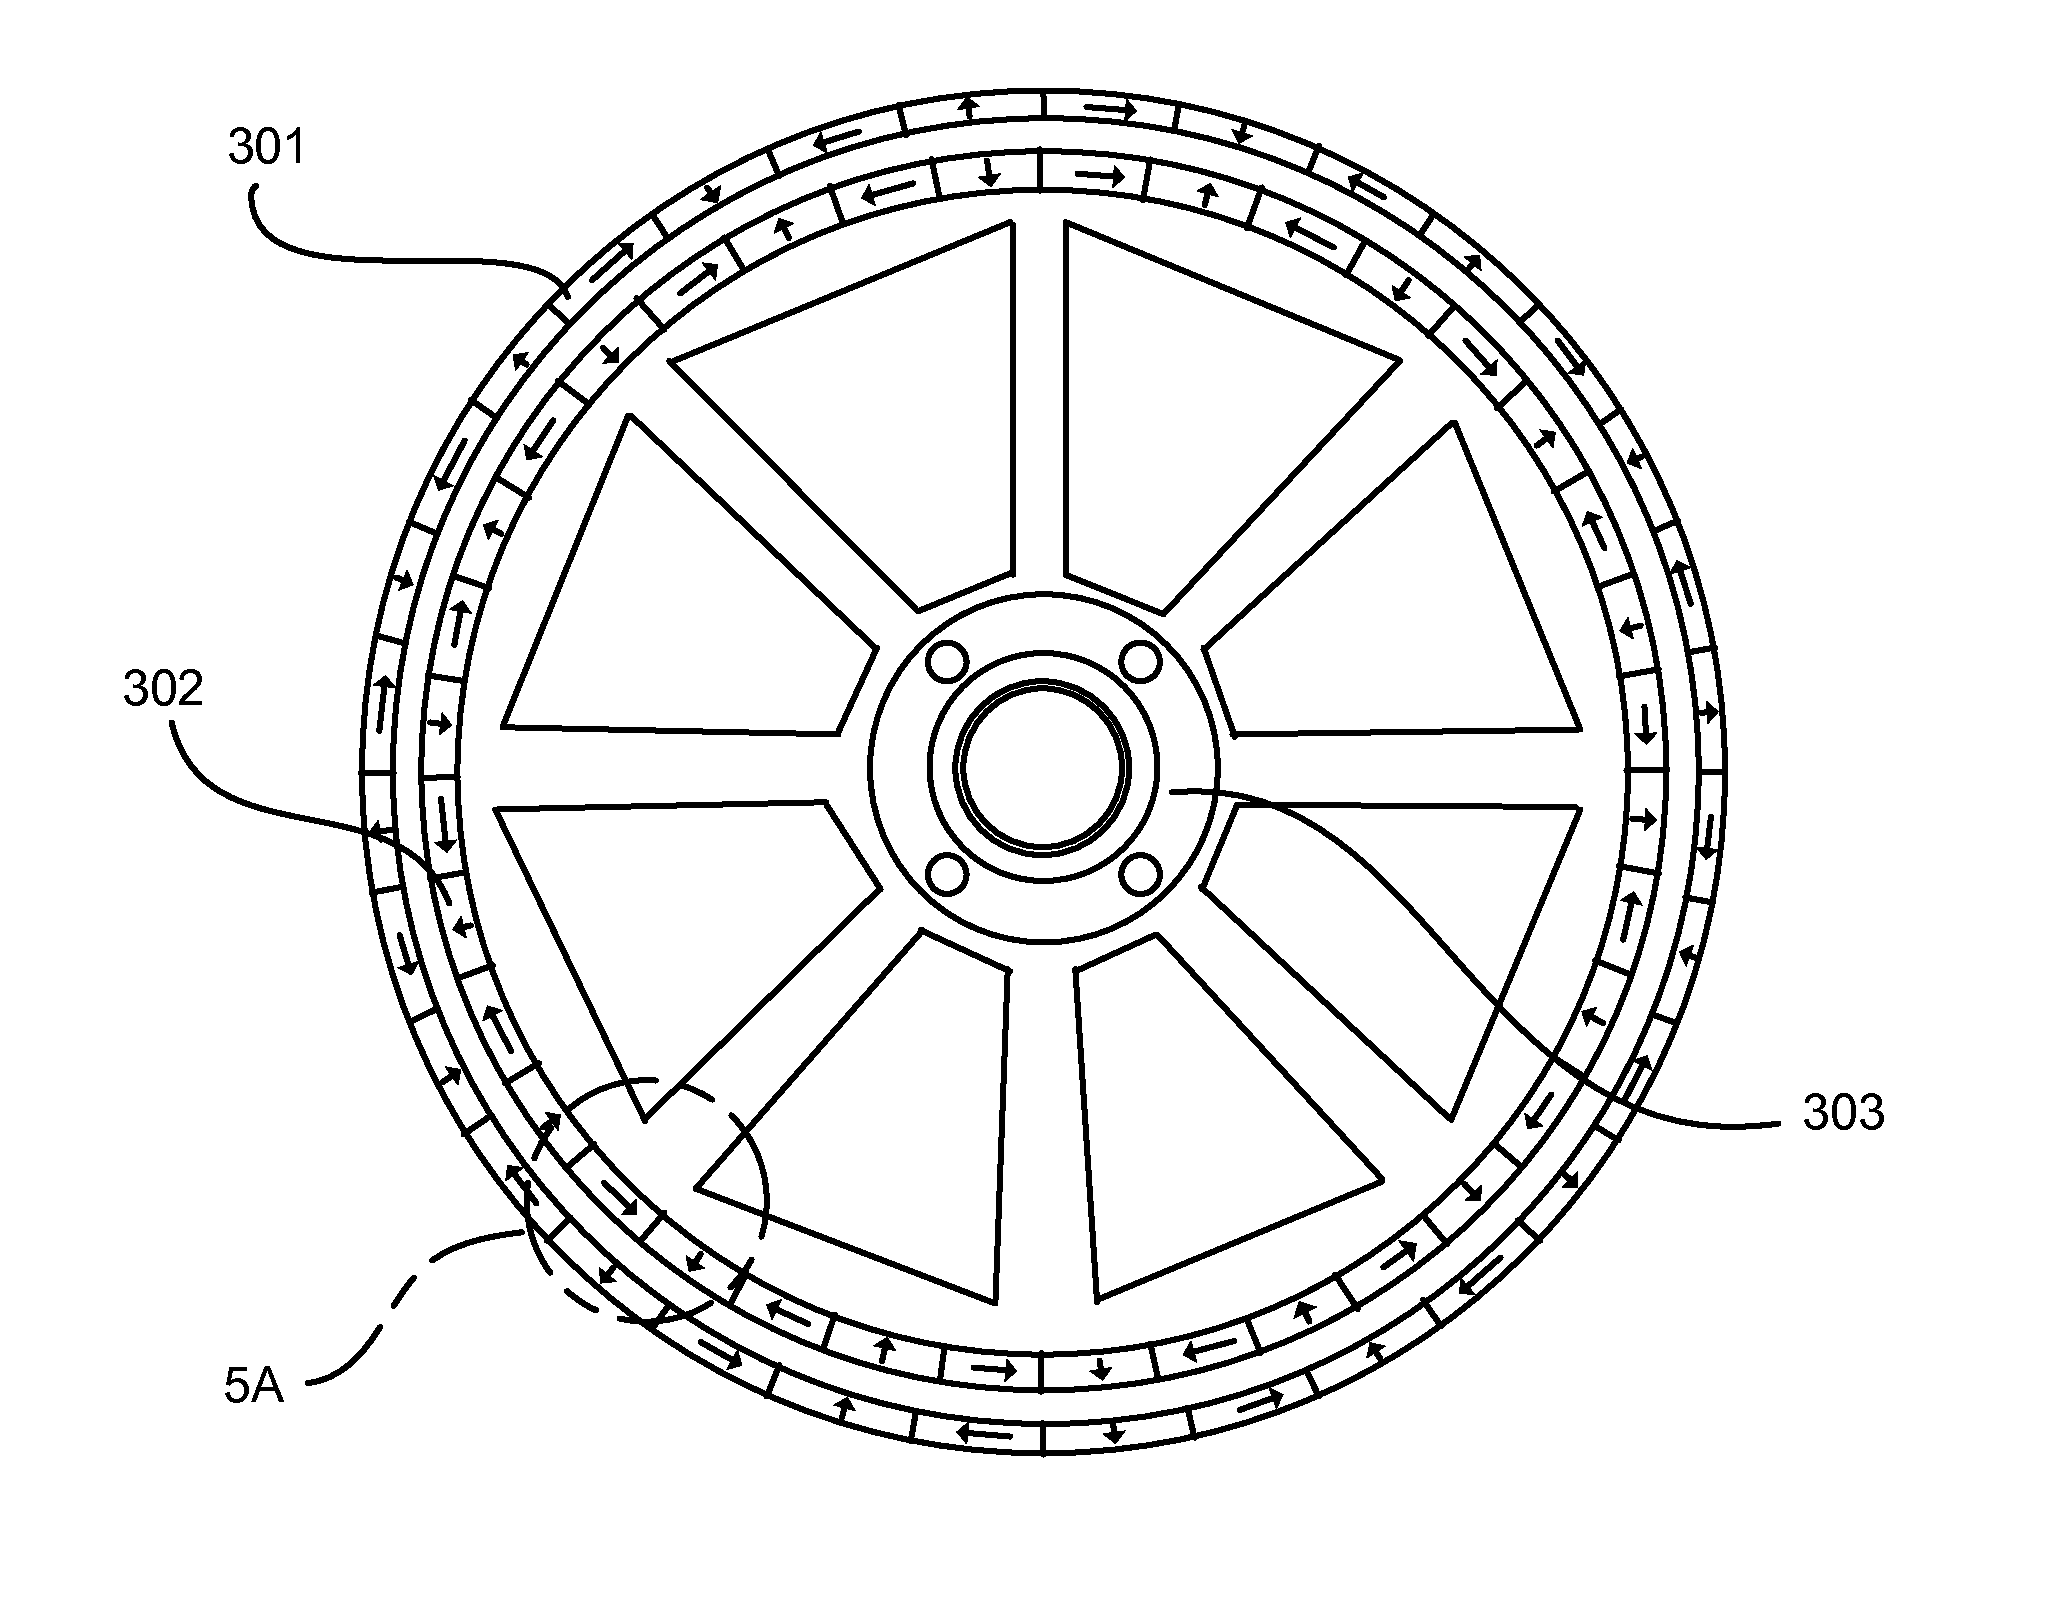 Halbach Array Electric Motor with Substantially Contiguous Electromagnetic Cores